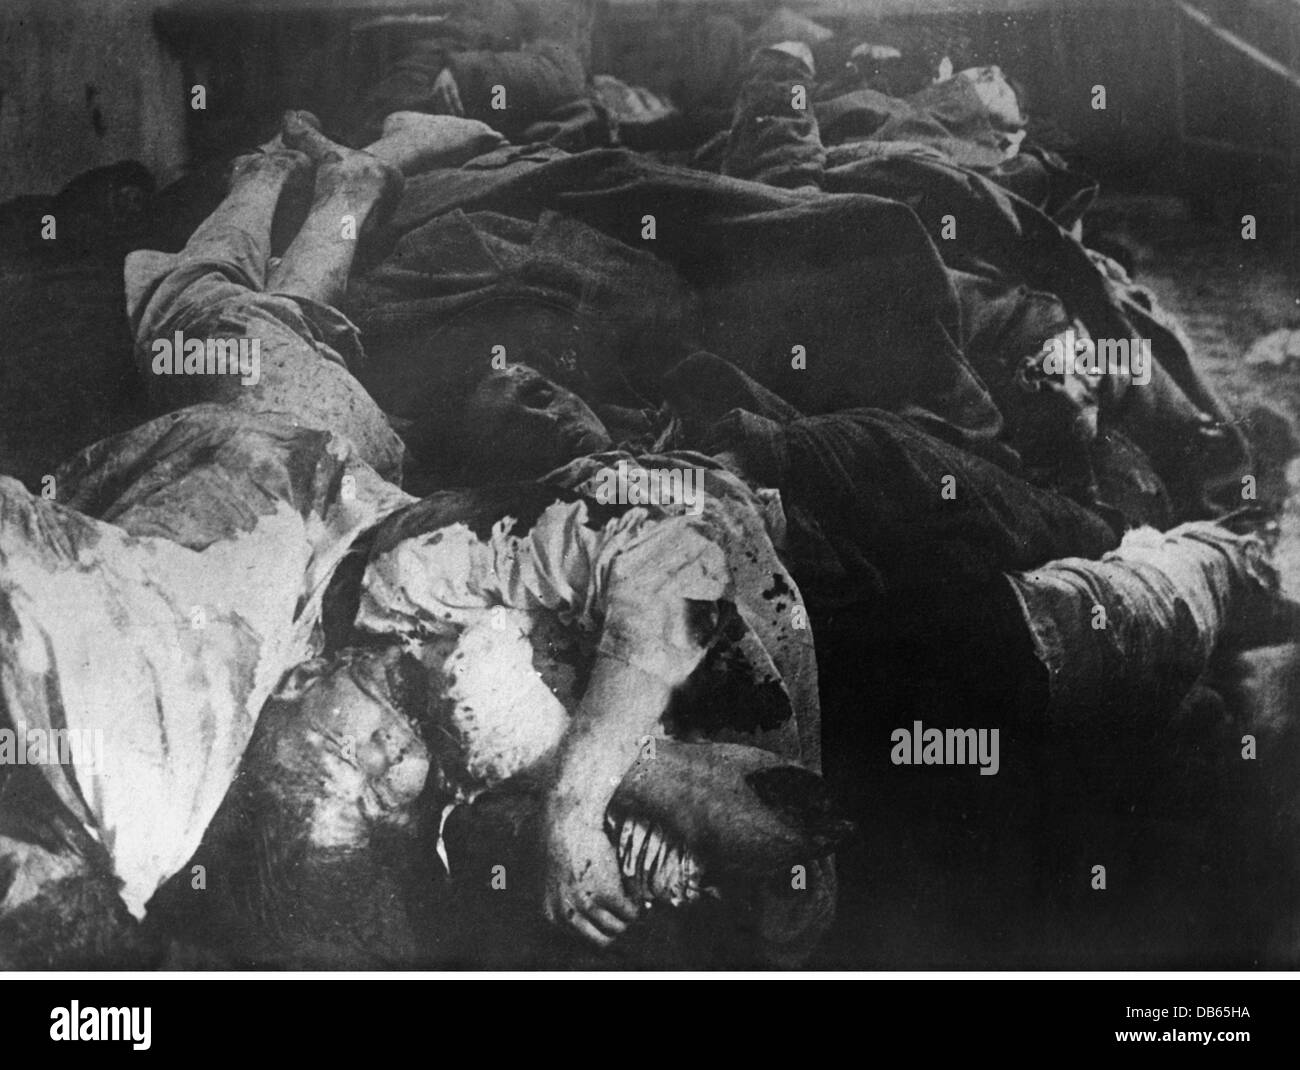 events, Latvian War of Independence, war crime victims at Jelgava, German official caption: 'Belshevik atrocities at Mitau: Ghastly mutilated victims of Bolshevik cruelty', Additional-Rights-Clearences-Not Available Stock Photo